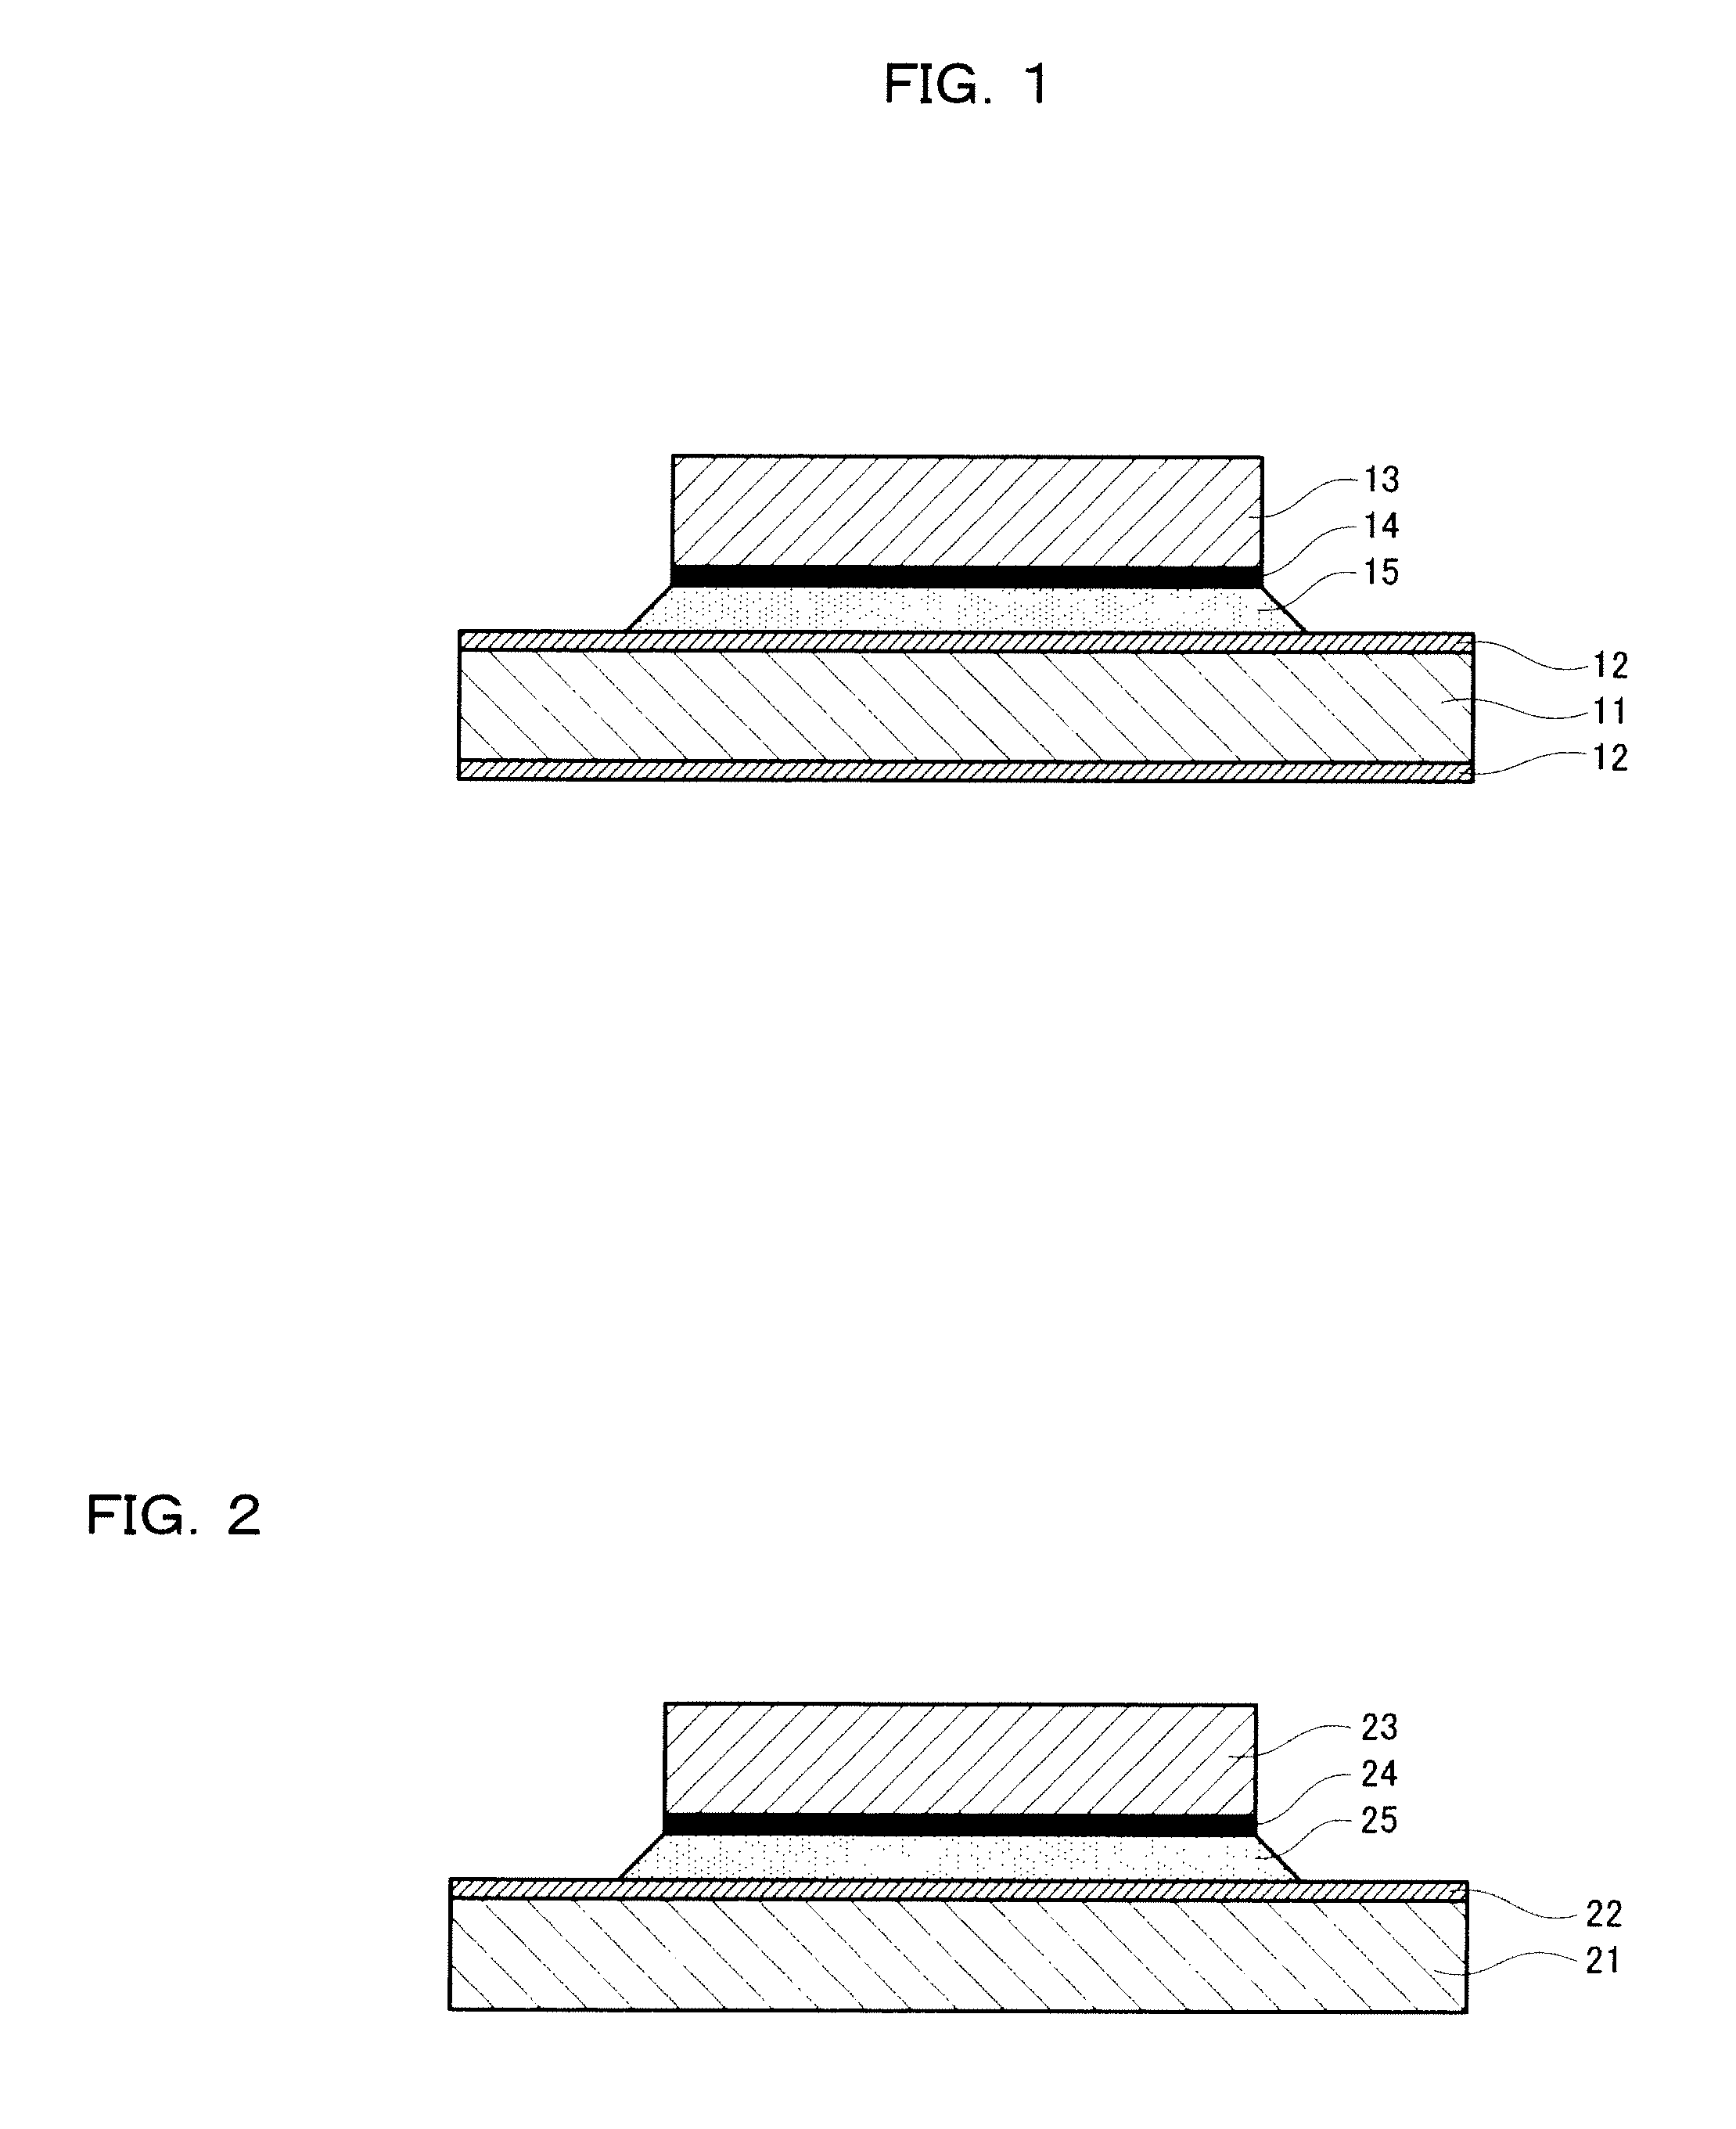 Semiconductor device using lead-free solder as die bonding material and die bonding material not containing lead